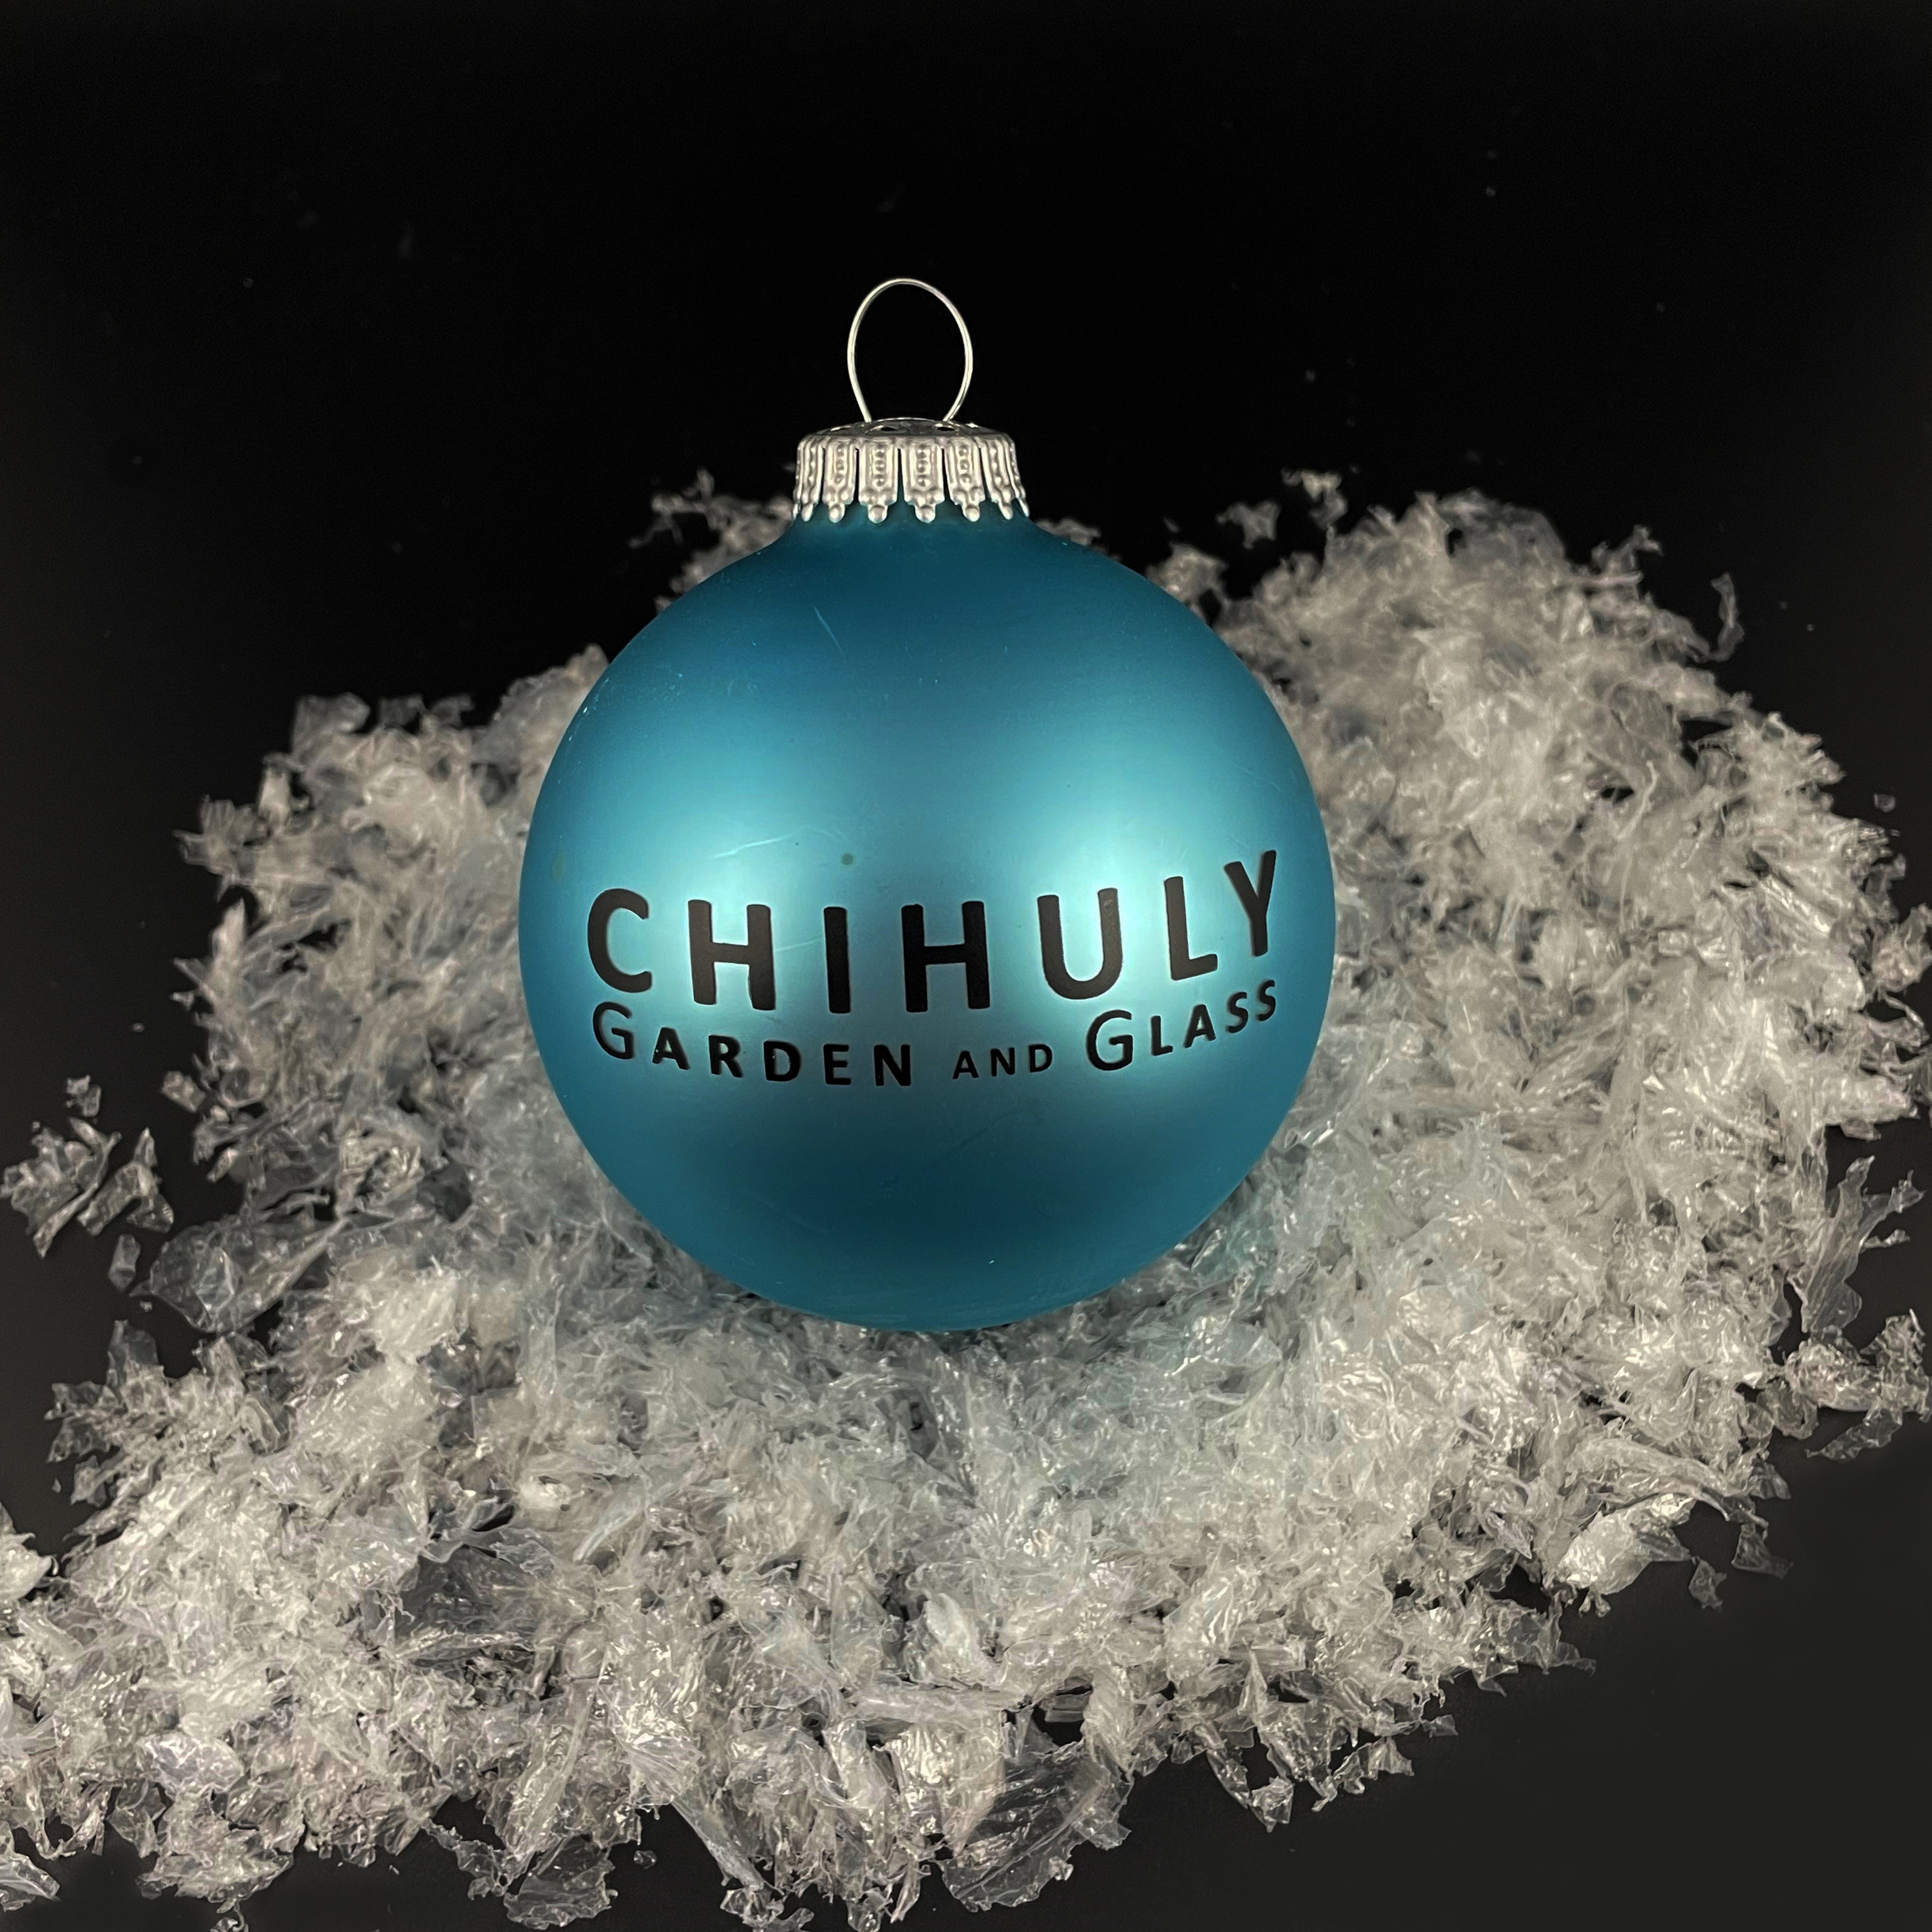 Chihuly Logo Ornament